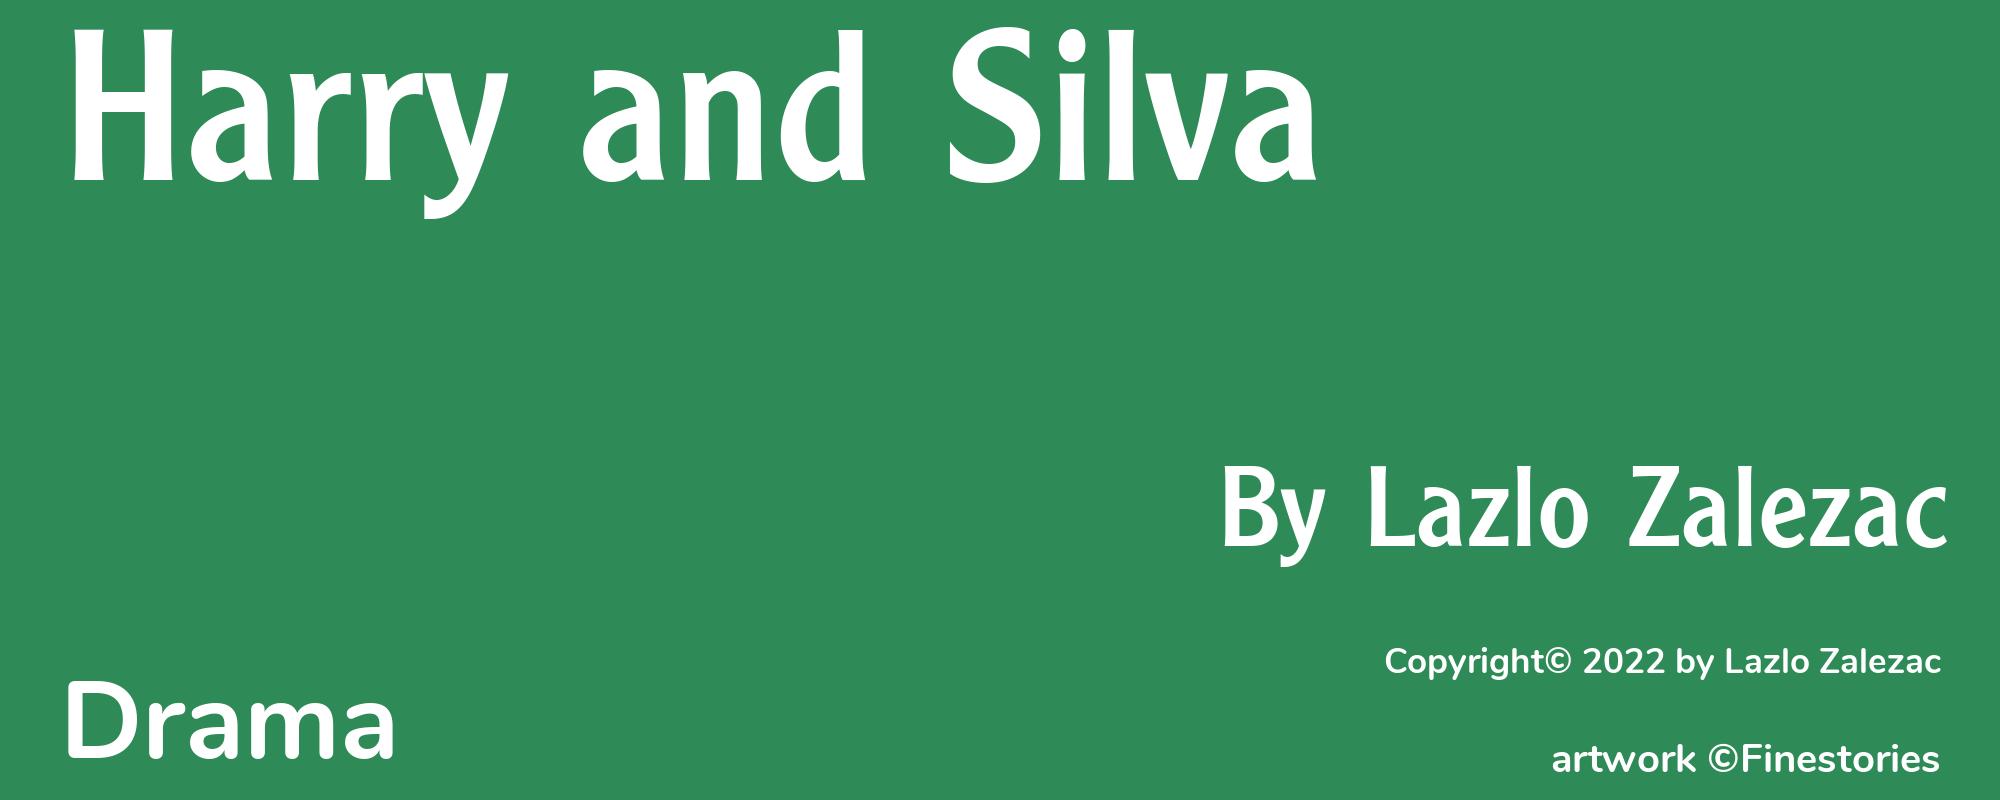 Harry and Silva - Cover